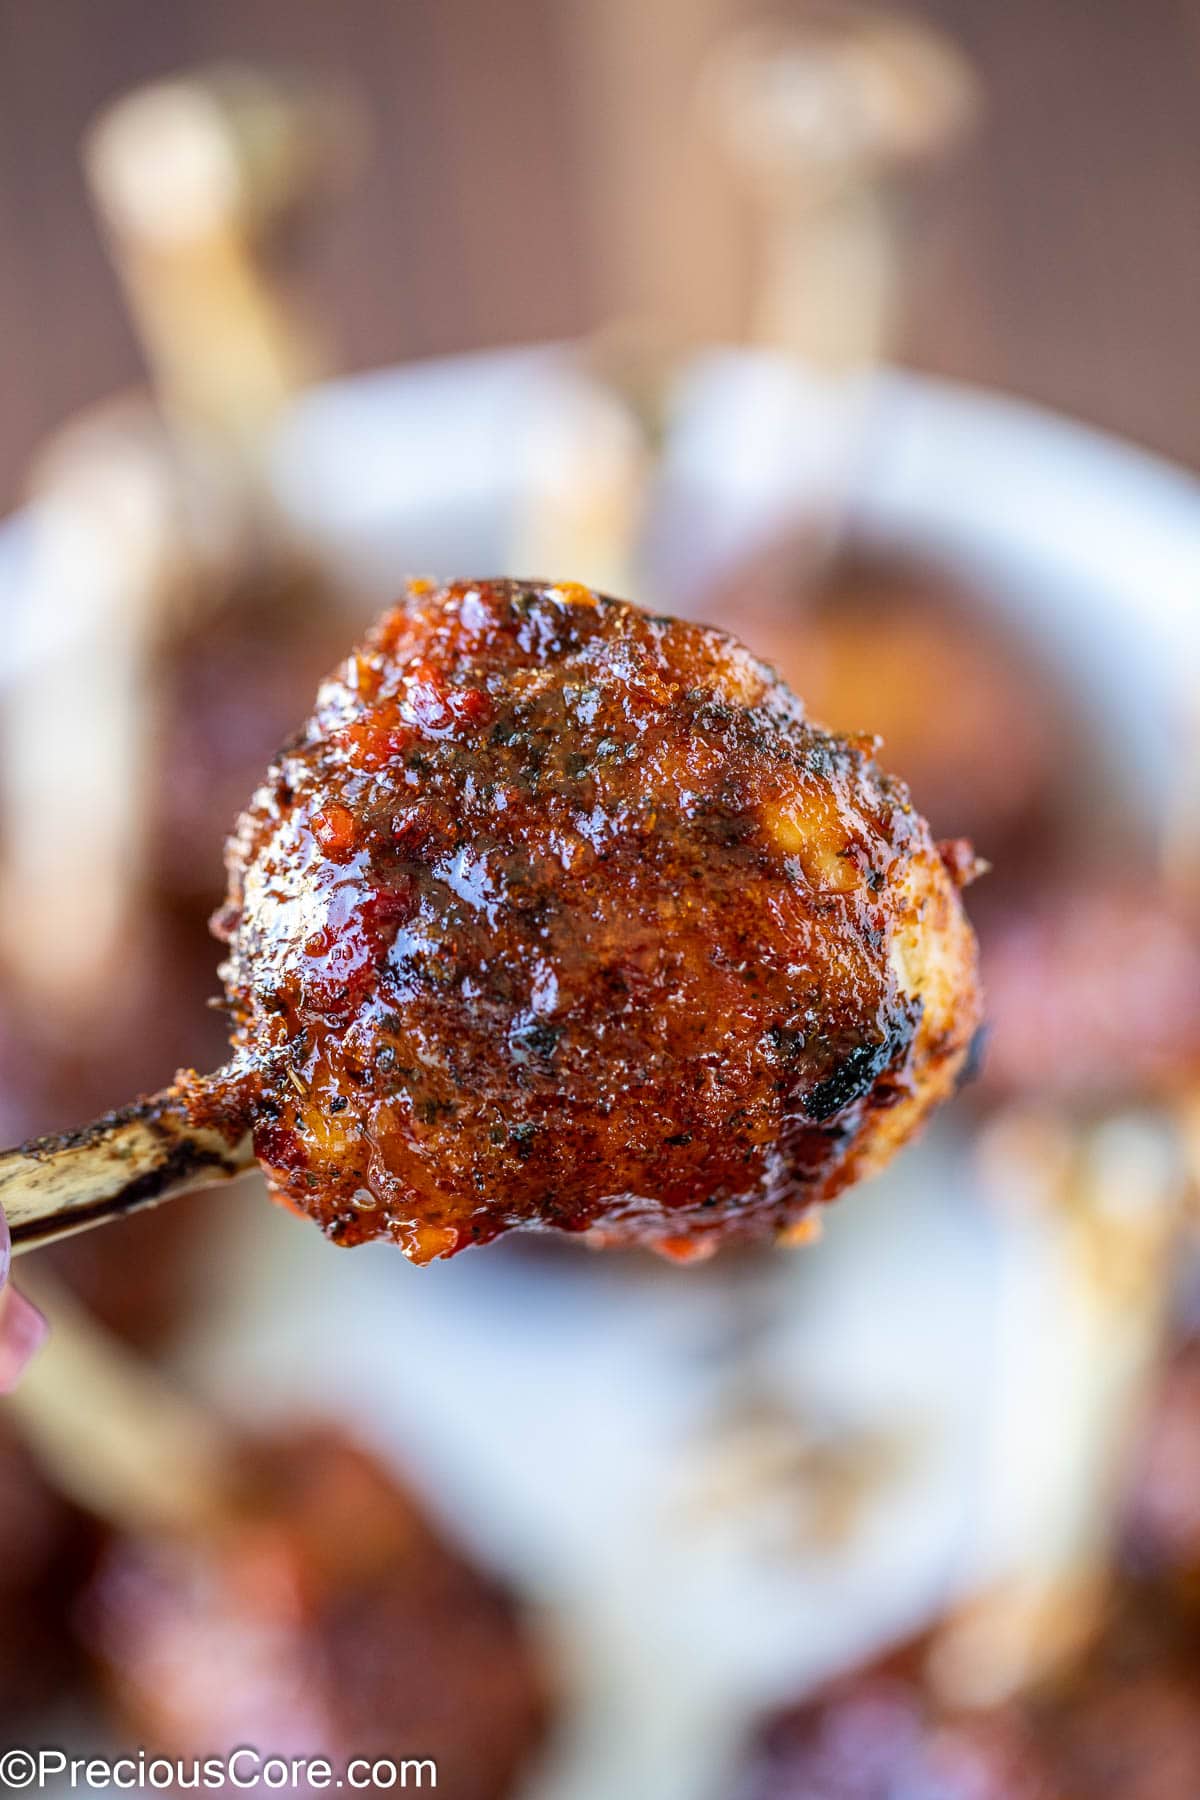 Close-up view of a chicken drumstick lollipop with sauce.